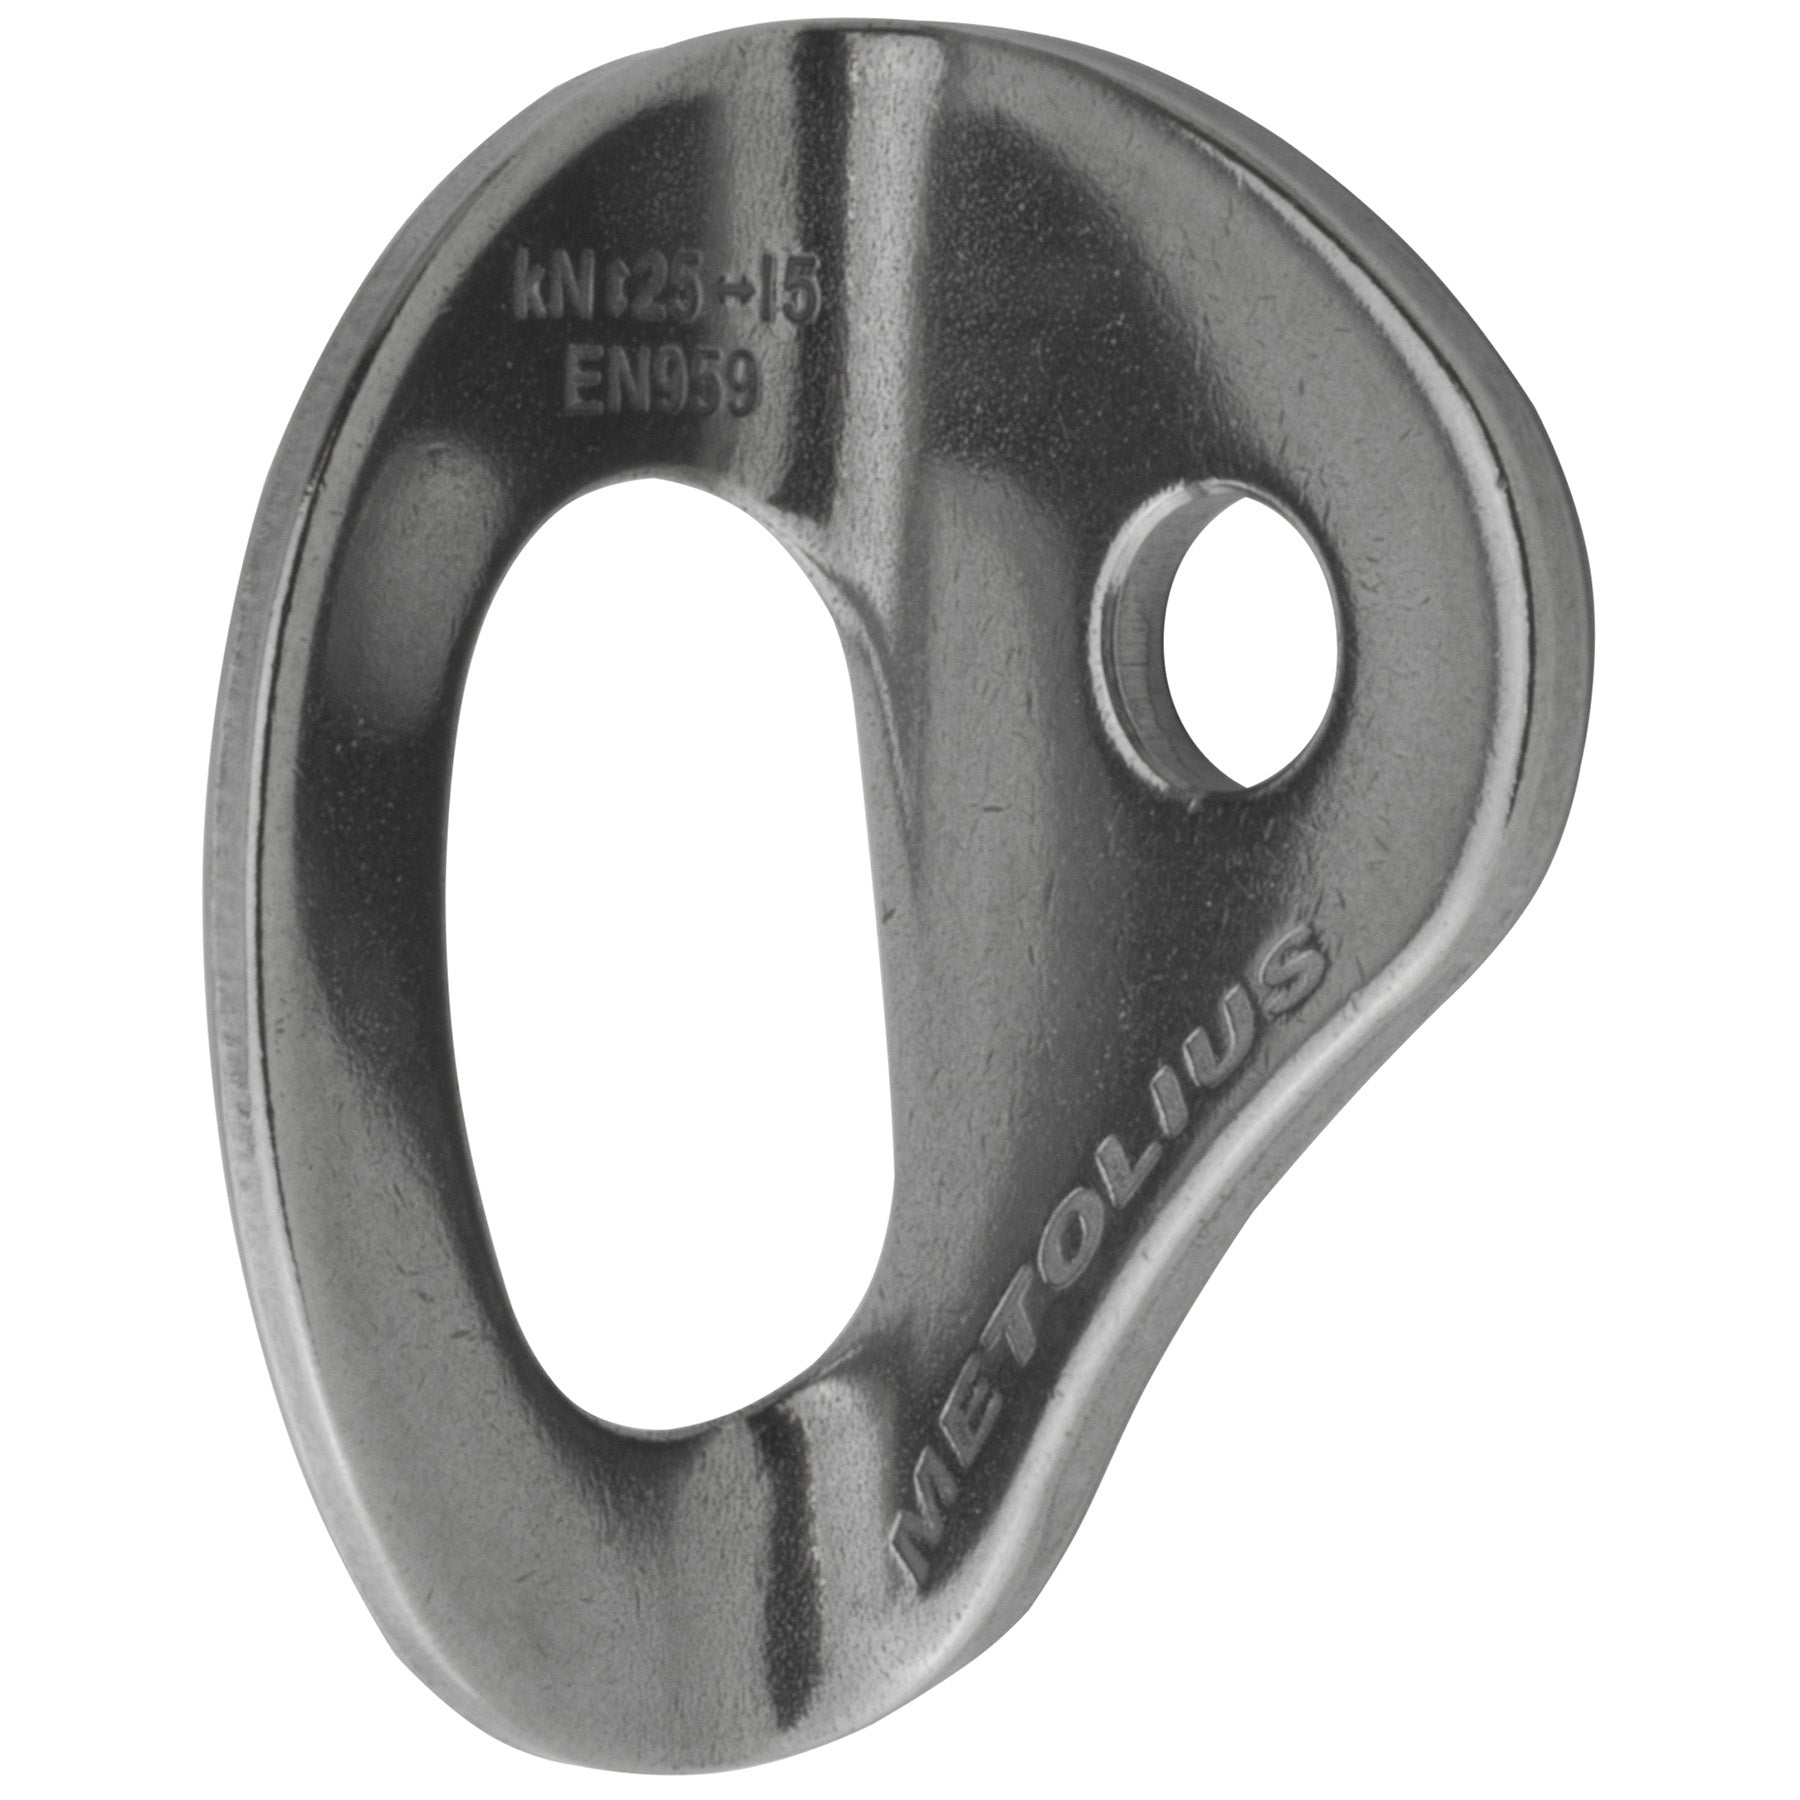 a photo of the metolius stainless steel bolt hanger 1/2"